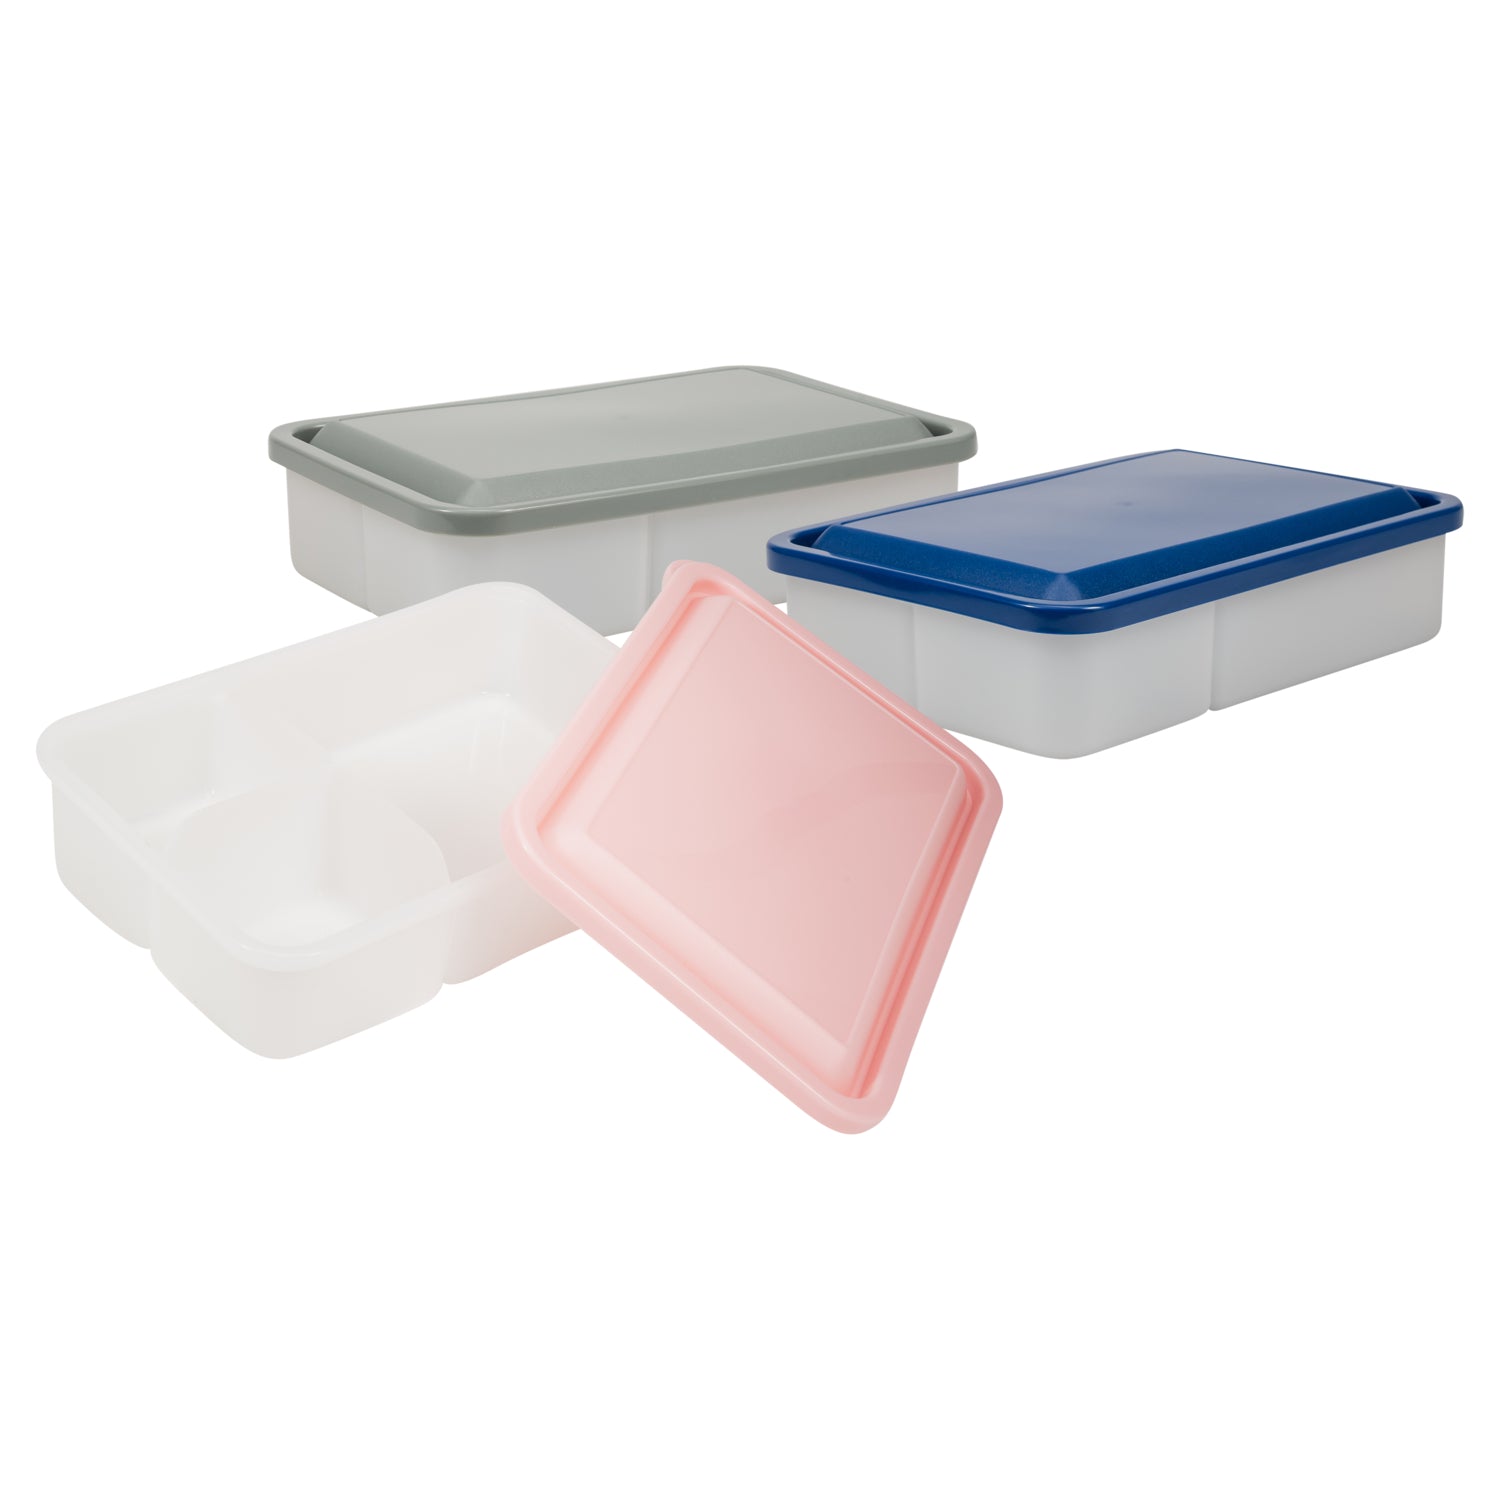 Cool Gear 3-Pack Bento Lunch Boxes | Easy Lunch Kits For School, Work,